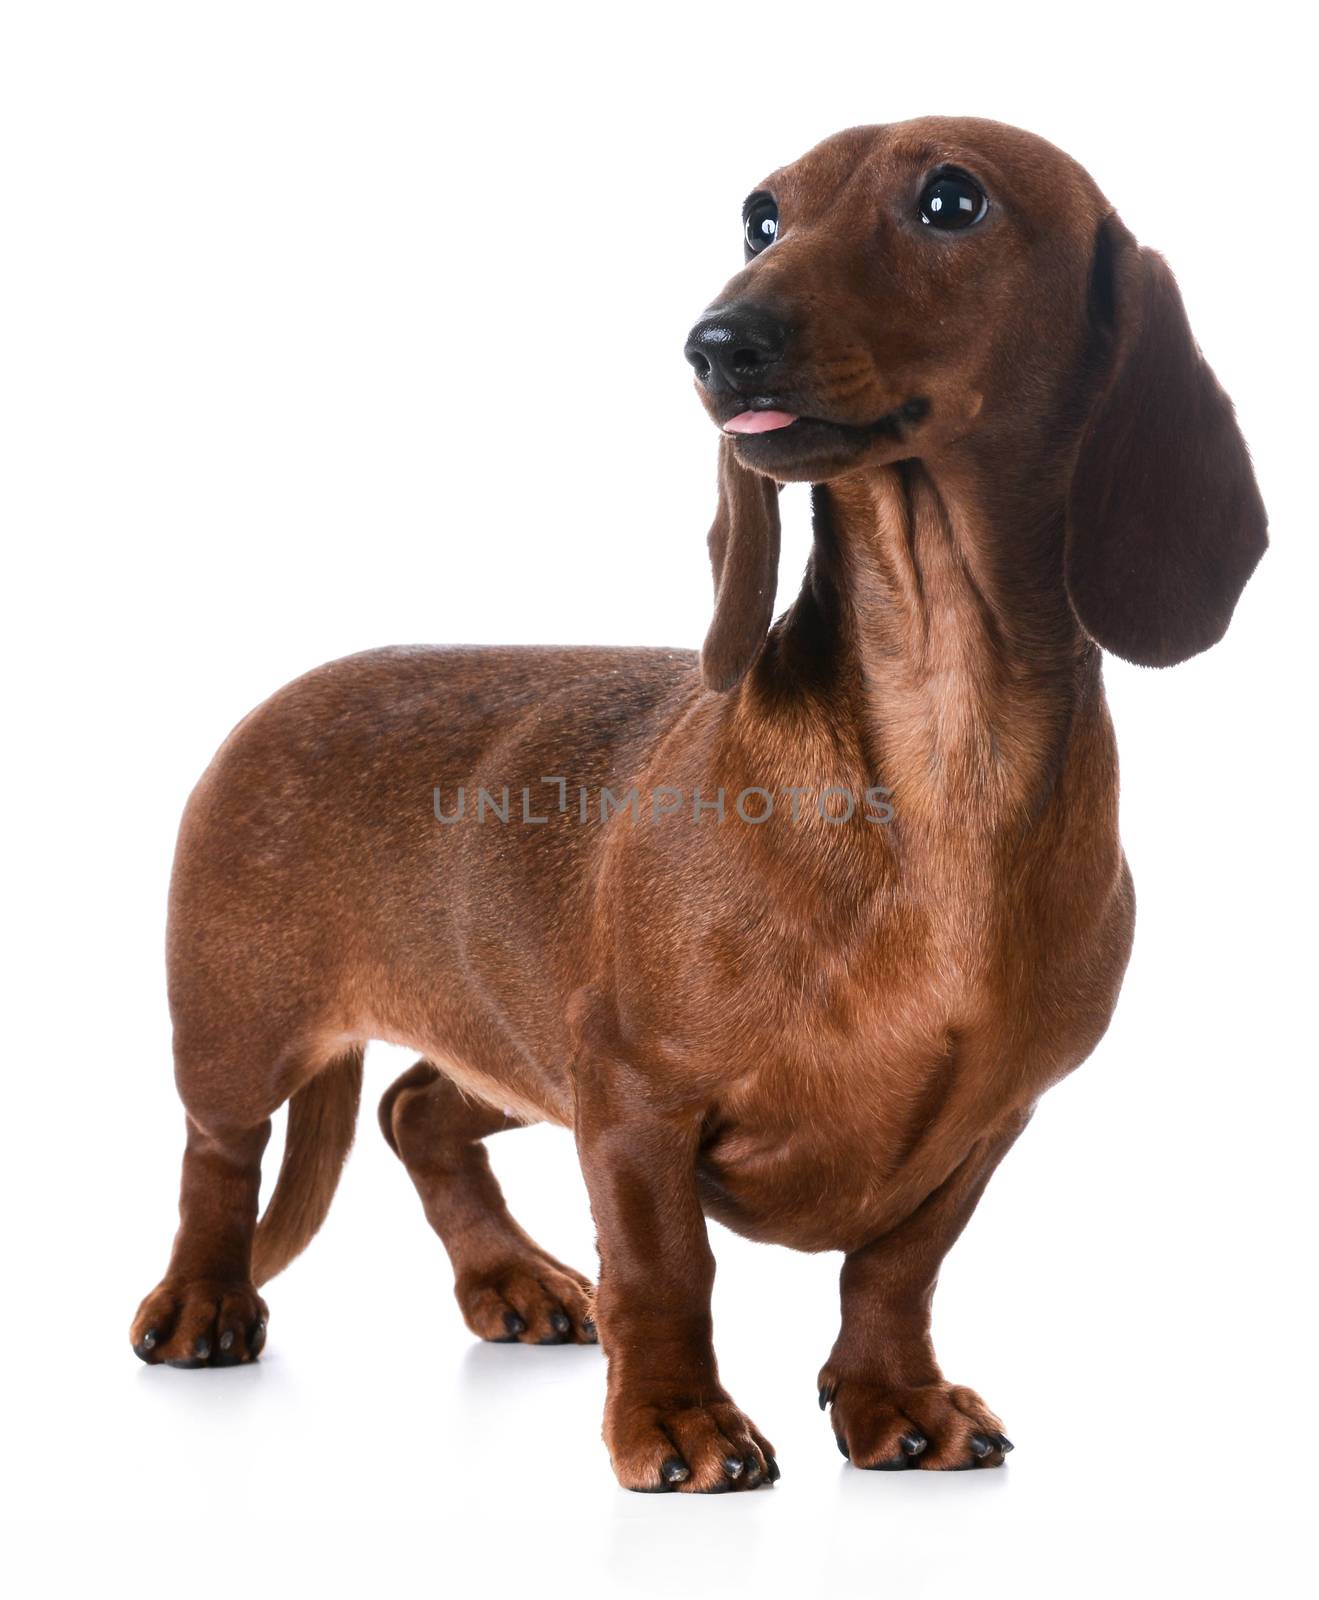 miniature smooth dachshund sticking tongue out on white background